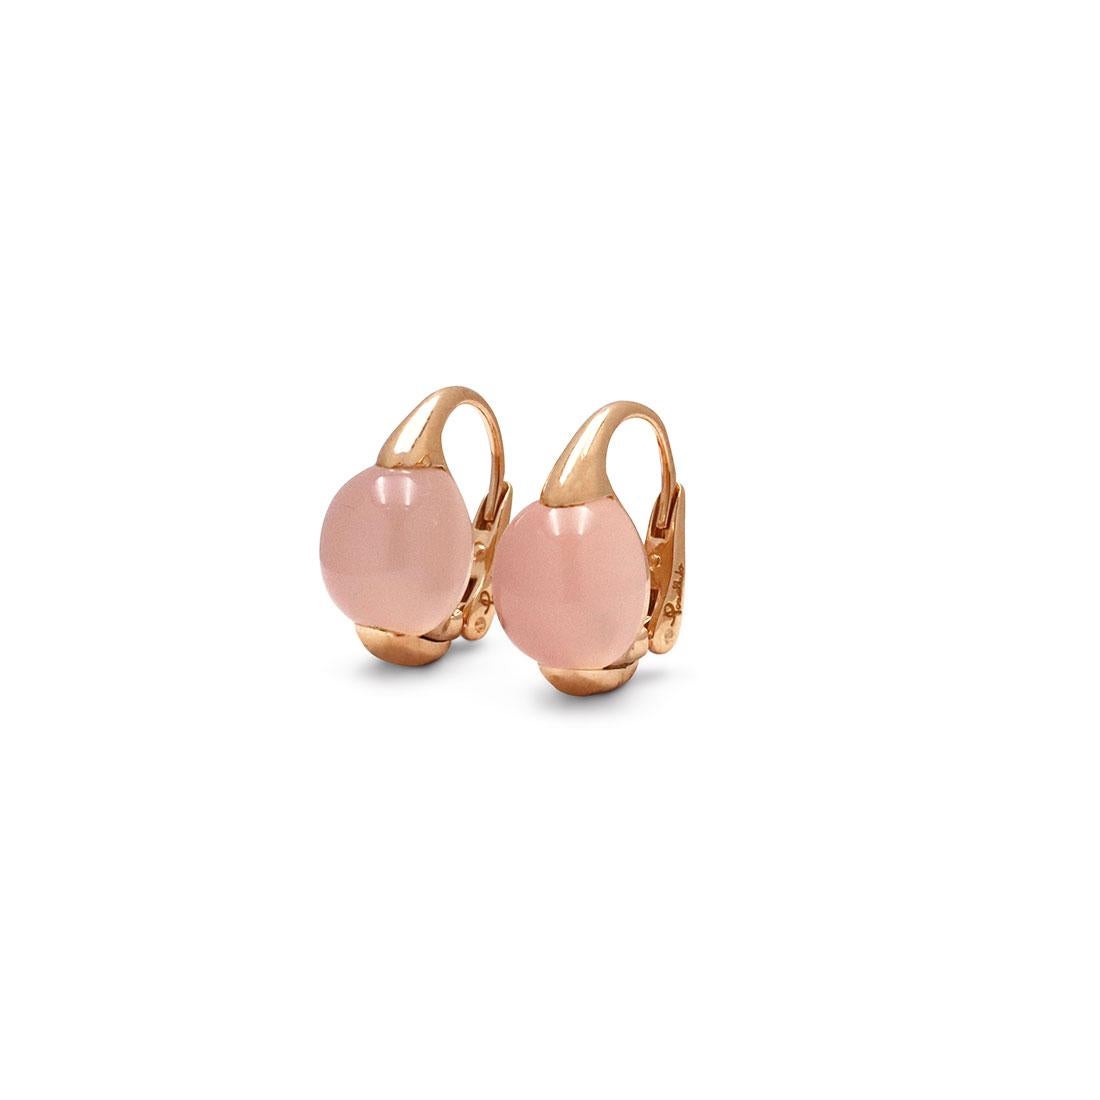 Authentic Pomellato Luna earrings crafted in high polished 18 karat rose gold and featuring round quartz cabochons. The earrings measure 18.9 mm in length. Signed Pomellato, 750, serial number and hallmark. The earrings are presented with the papers